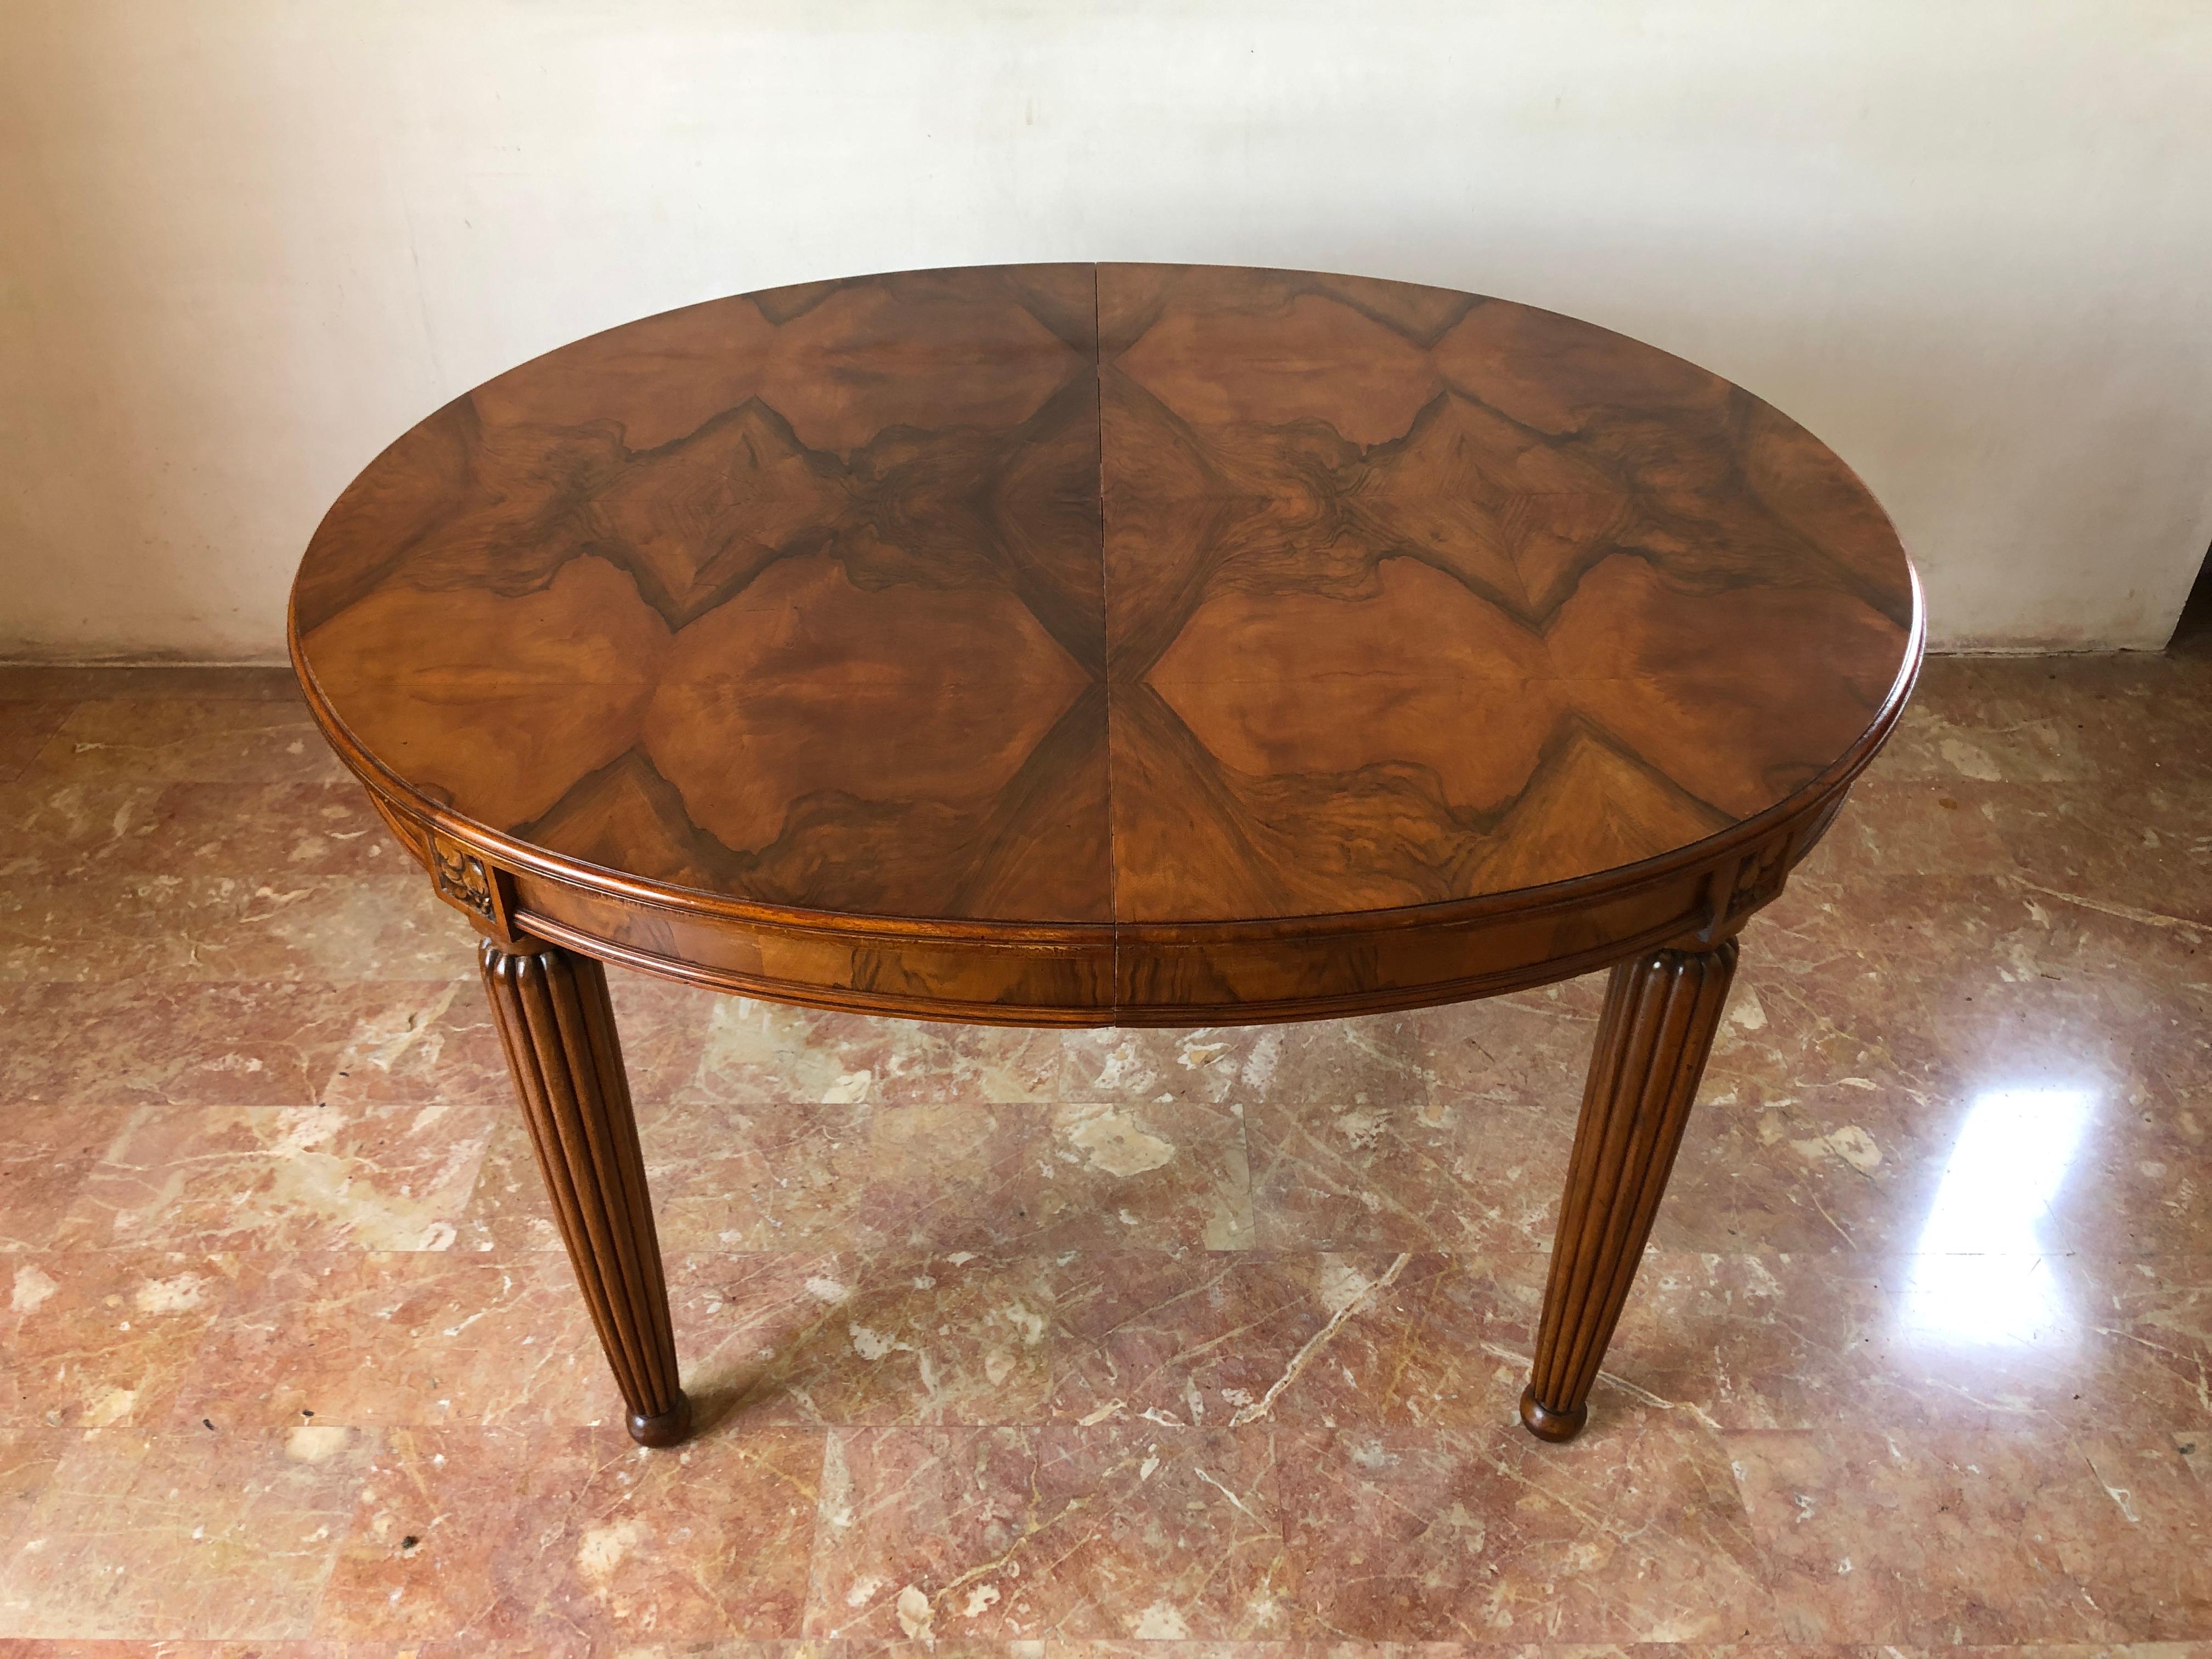 Early 20th Century French Liberty Art Nouveau Dining Table in Walnut, 1920s